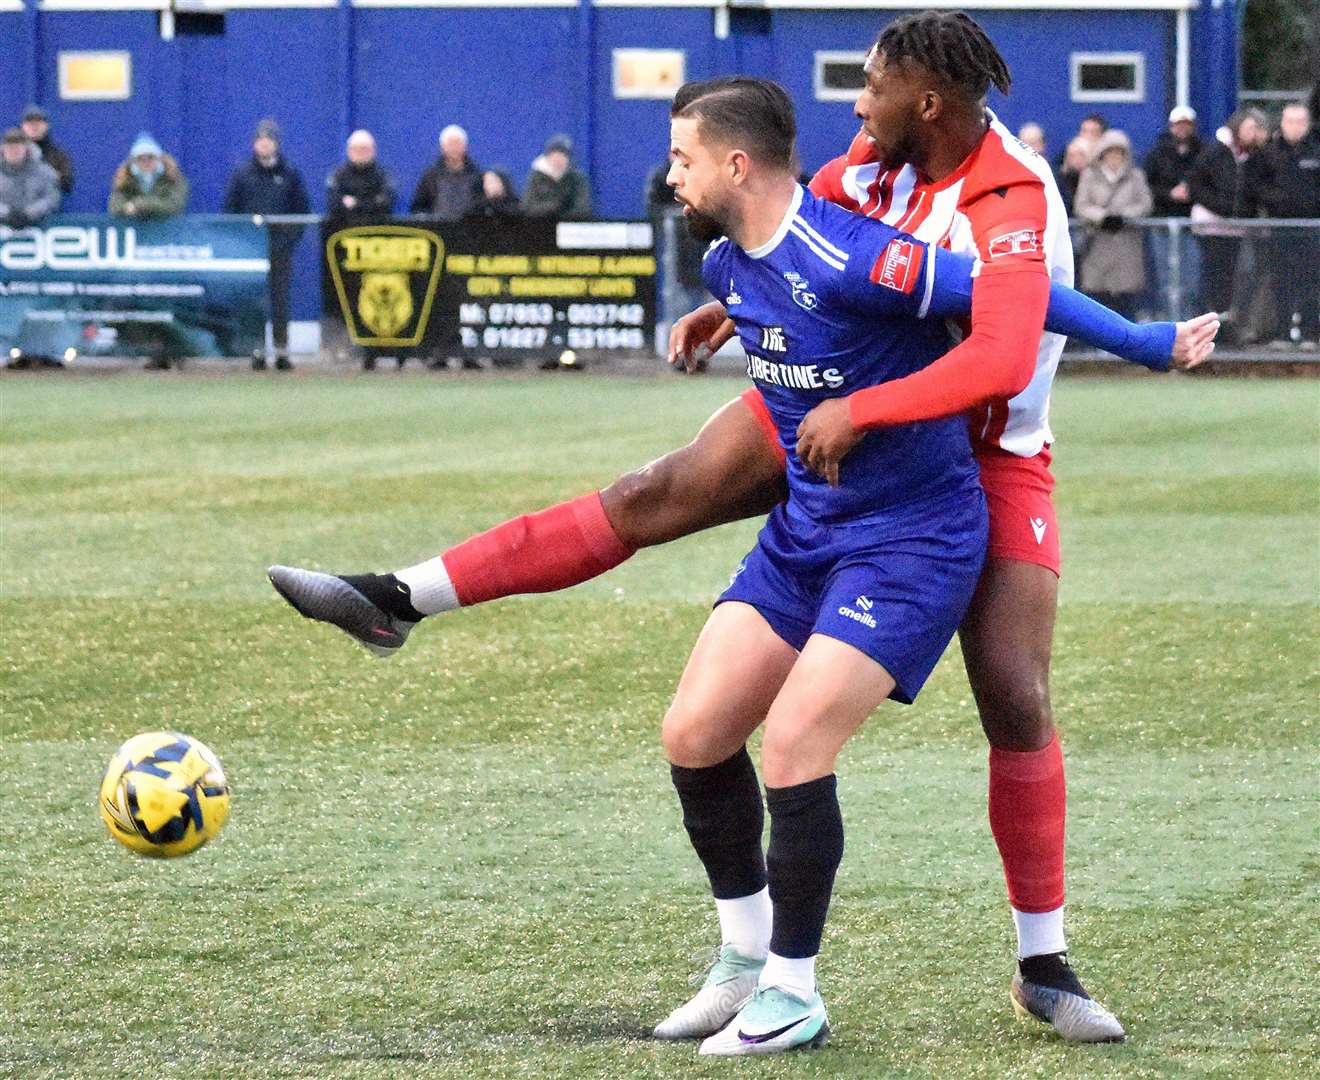 Ben Greenhalgh, pictured in action during Margate’s derby defeat to Folkestone, was sent off in their 3-2 weekend loss at Whitehawk. But the club are set to appeal his red card. Picture: Randolph File